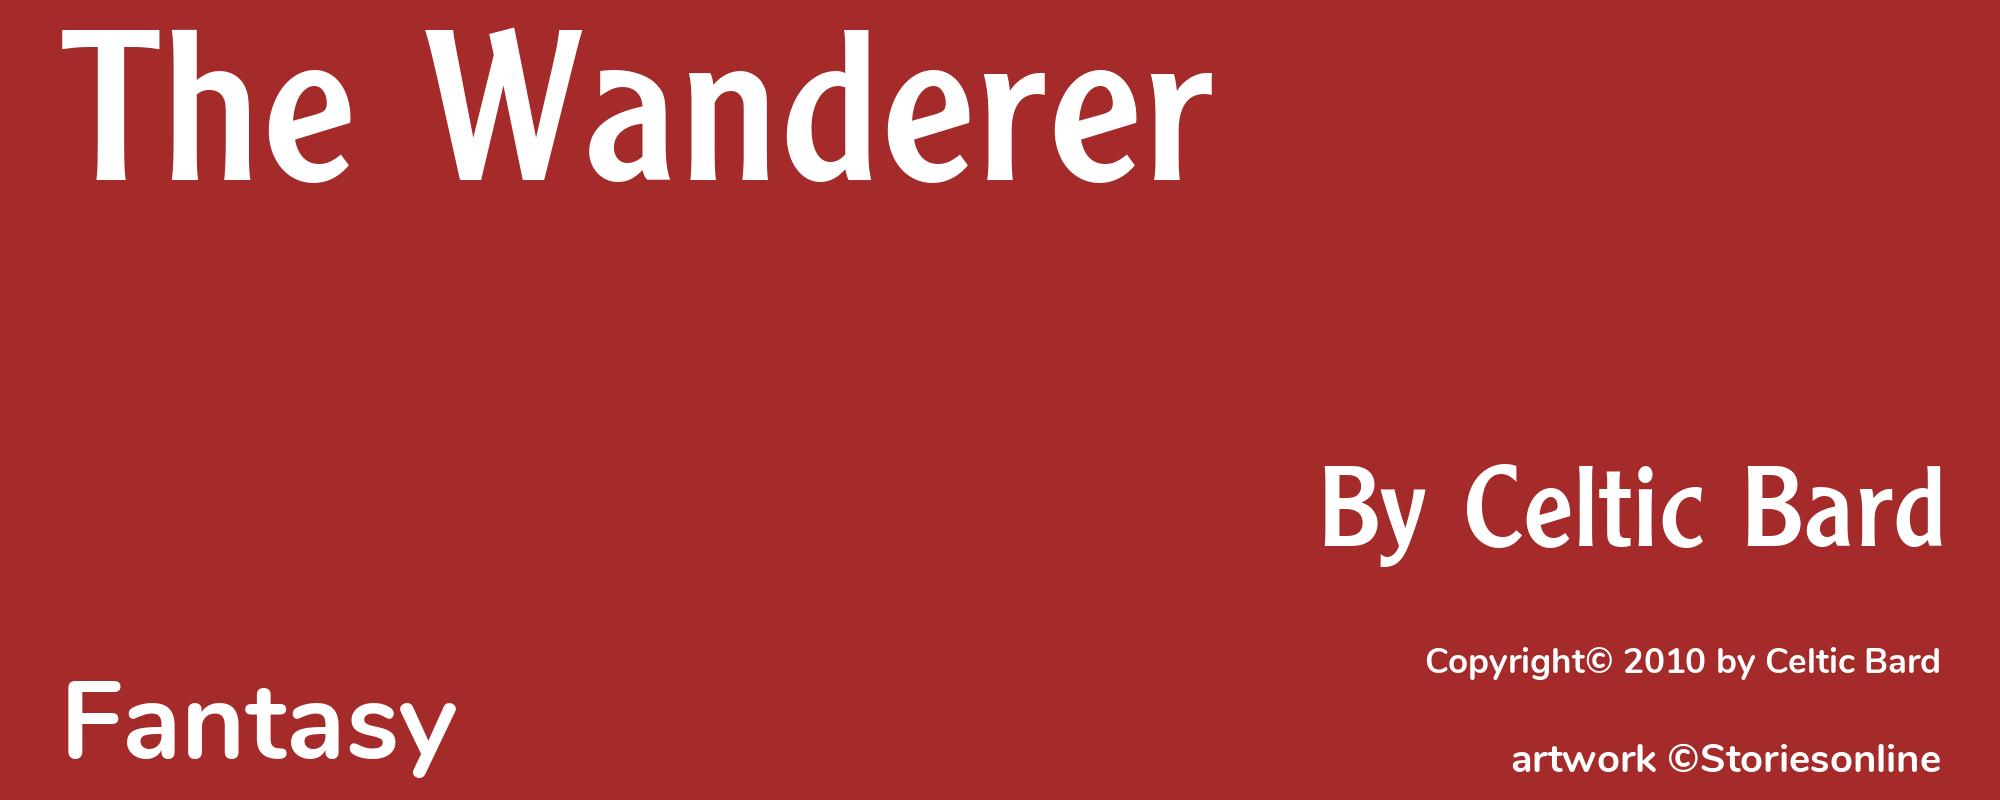 The Wanderer - Cover